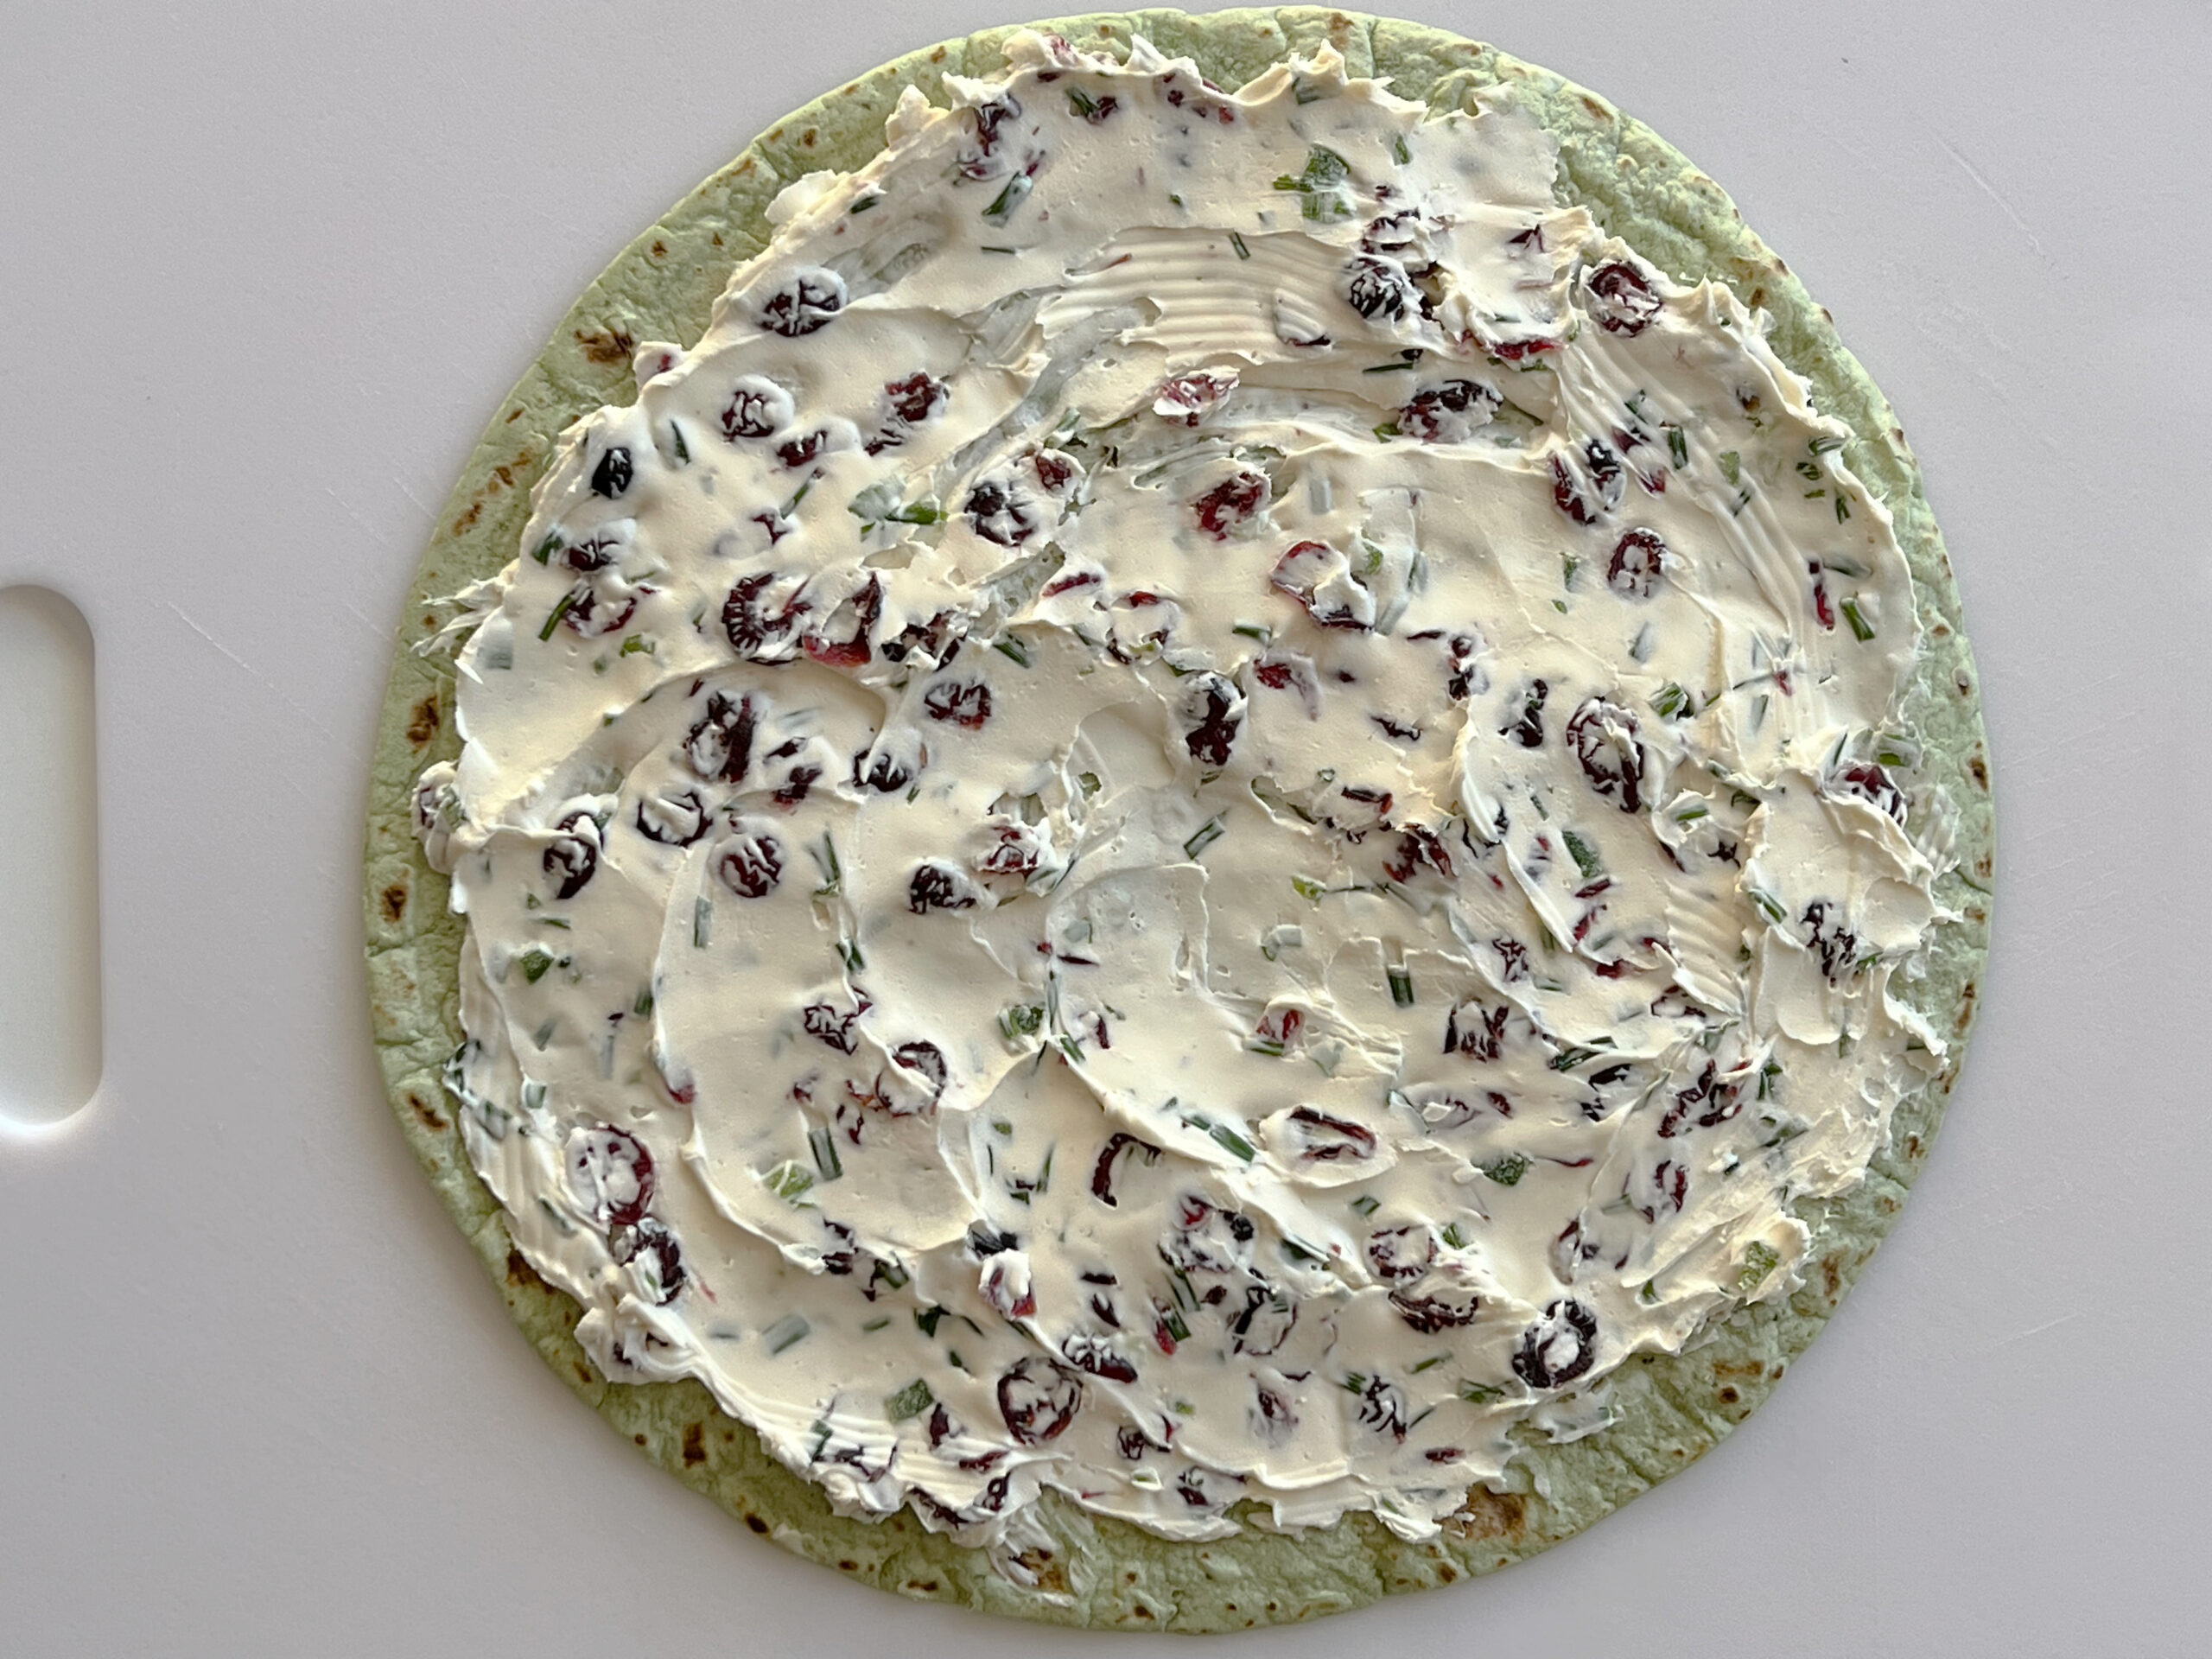 This photo shows the cream cheese mixture spread evenly on a spinach herb tortilla on a white cutting board.  